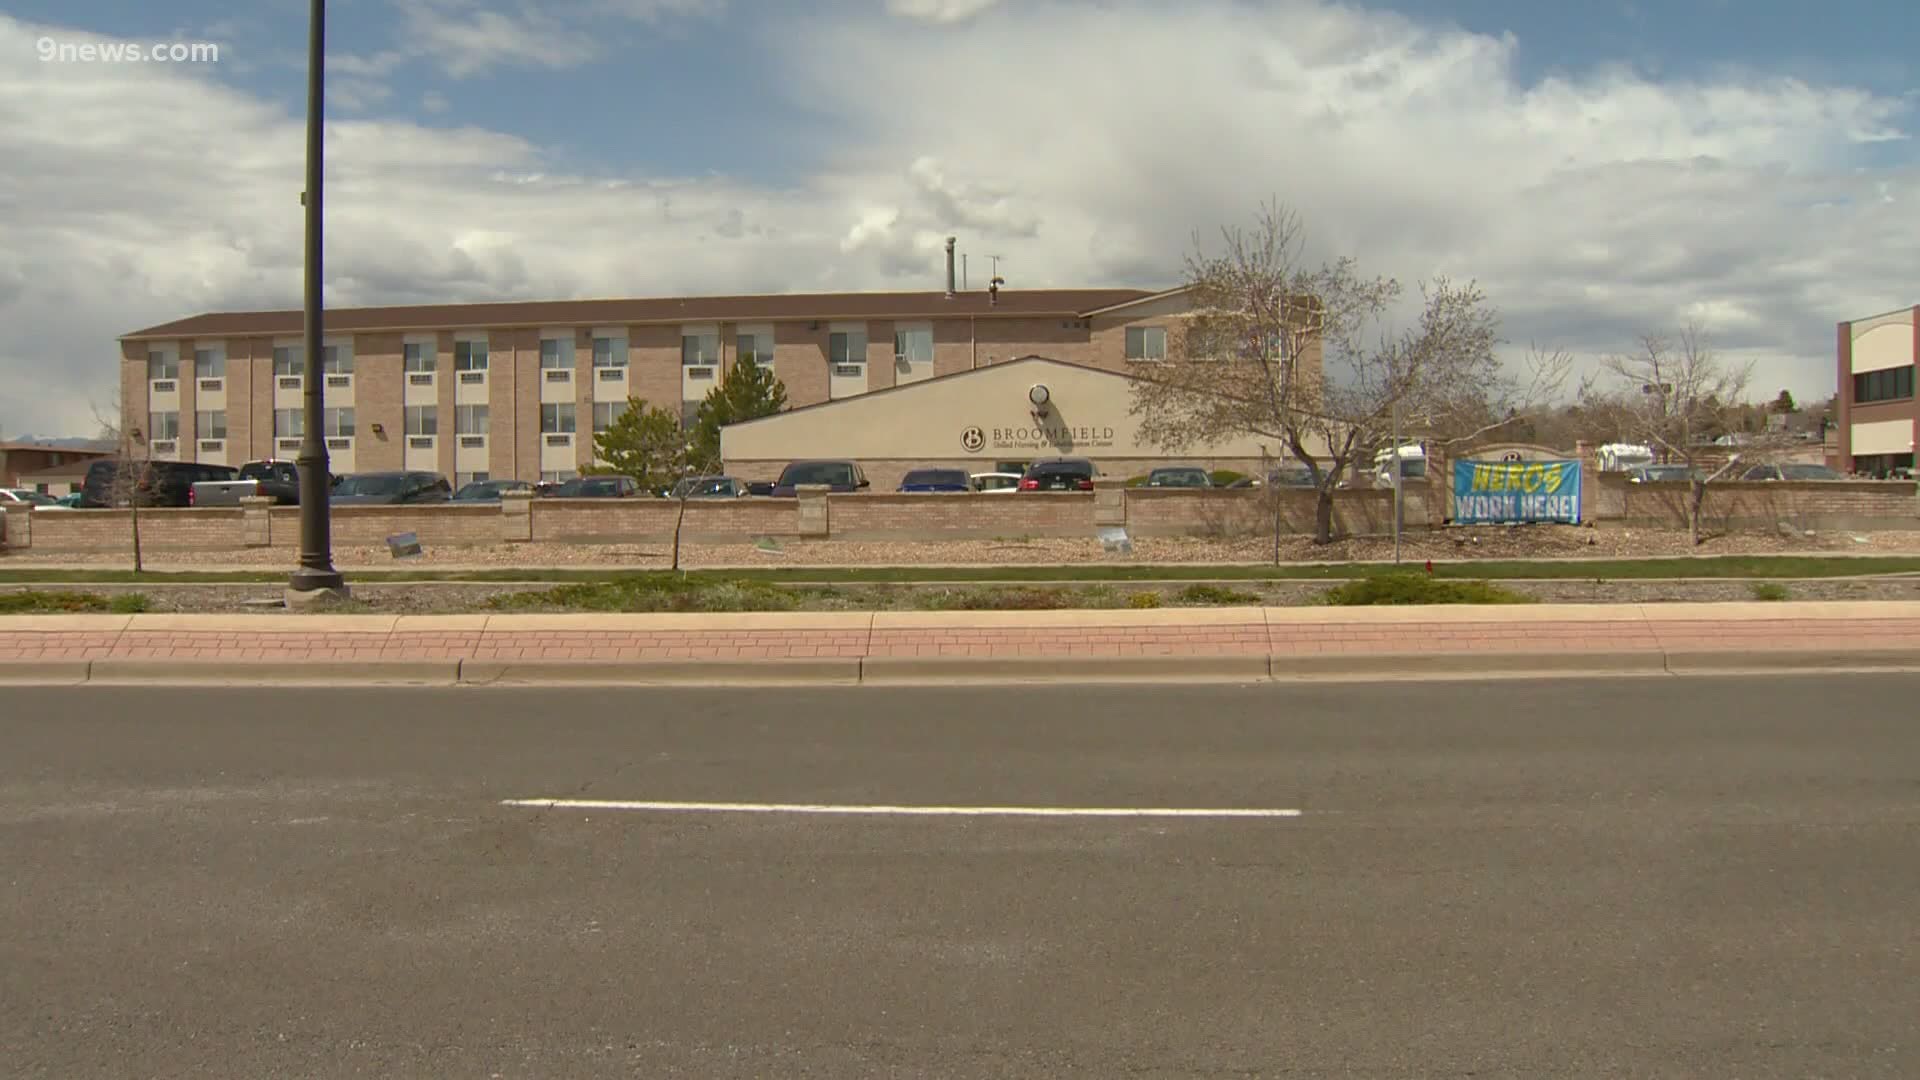 We spoke with a woman whose mother lives at a facility in Broomfield and tested positive.